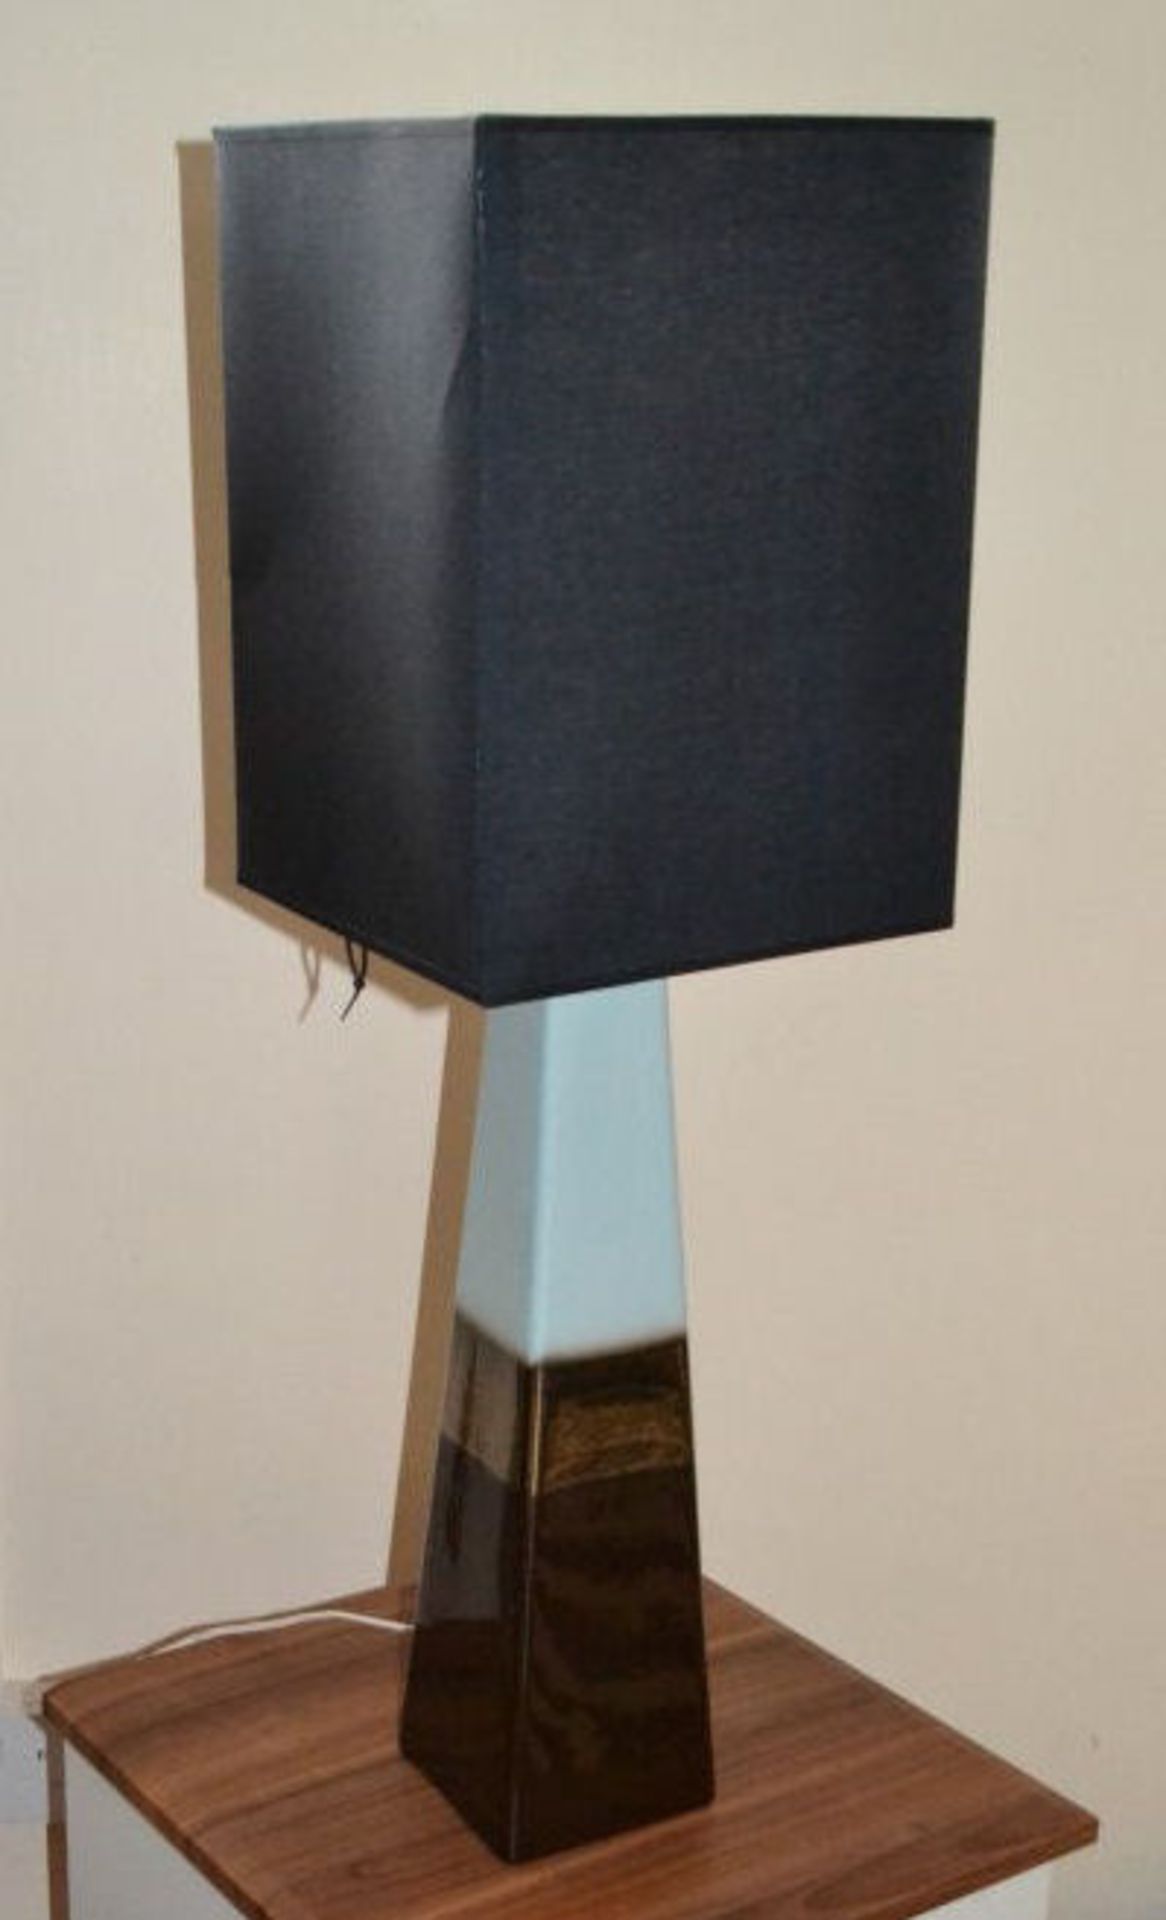 1 x Tall Lamp. Very Dark Brown/Copper/Light Blue Tapered Design - Image 2 of 3